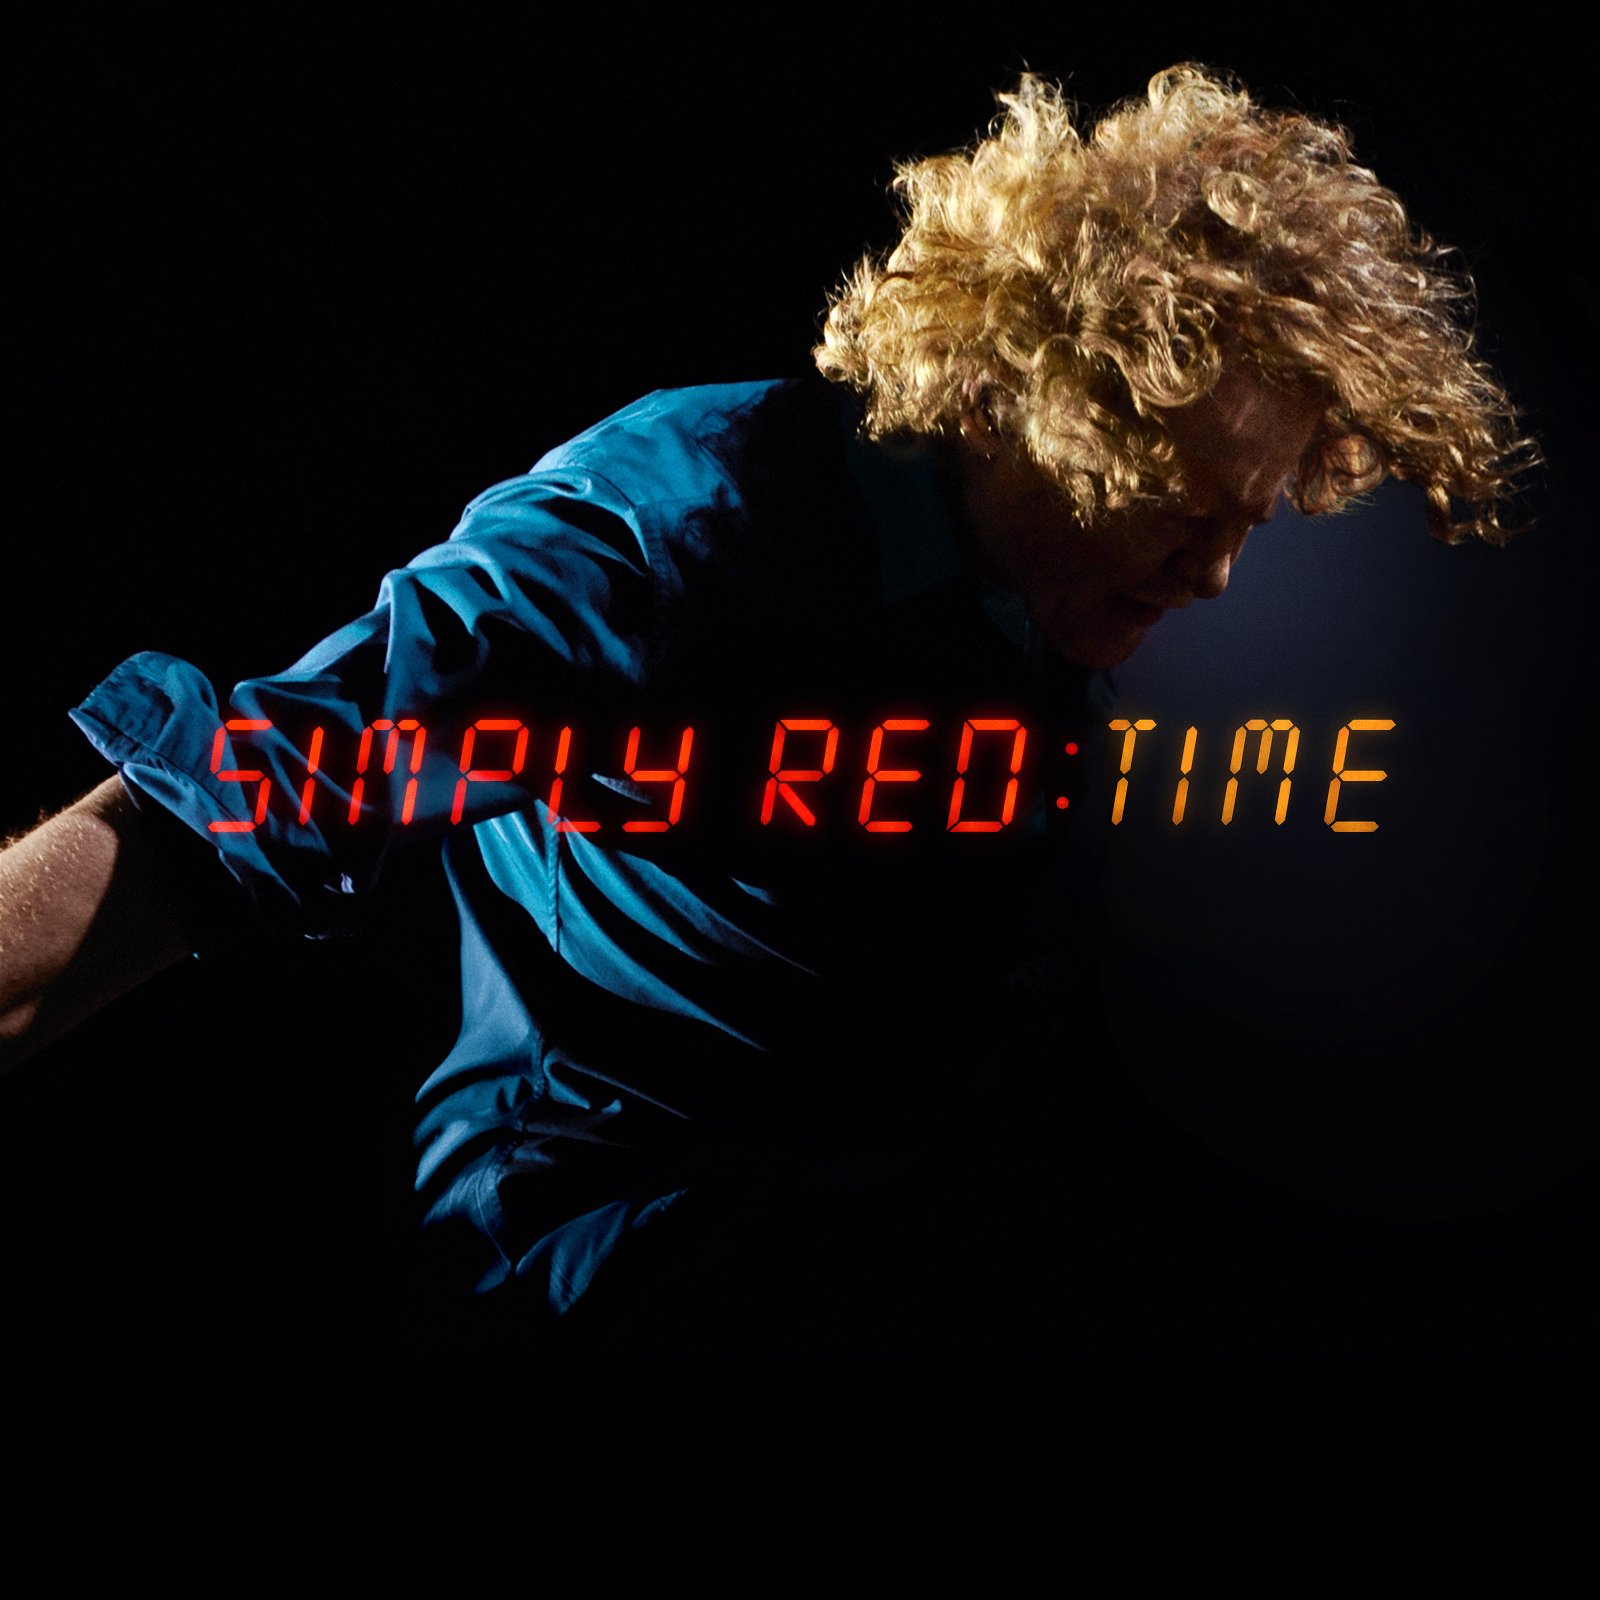 CD Shop - SIMPLY RED TIME / 140GR.